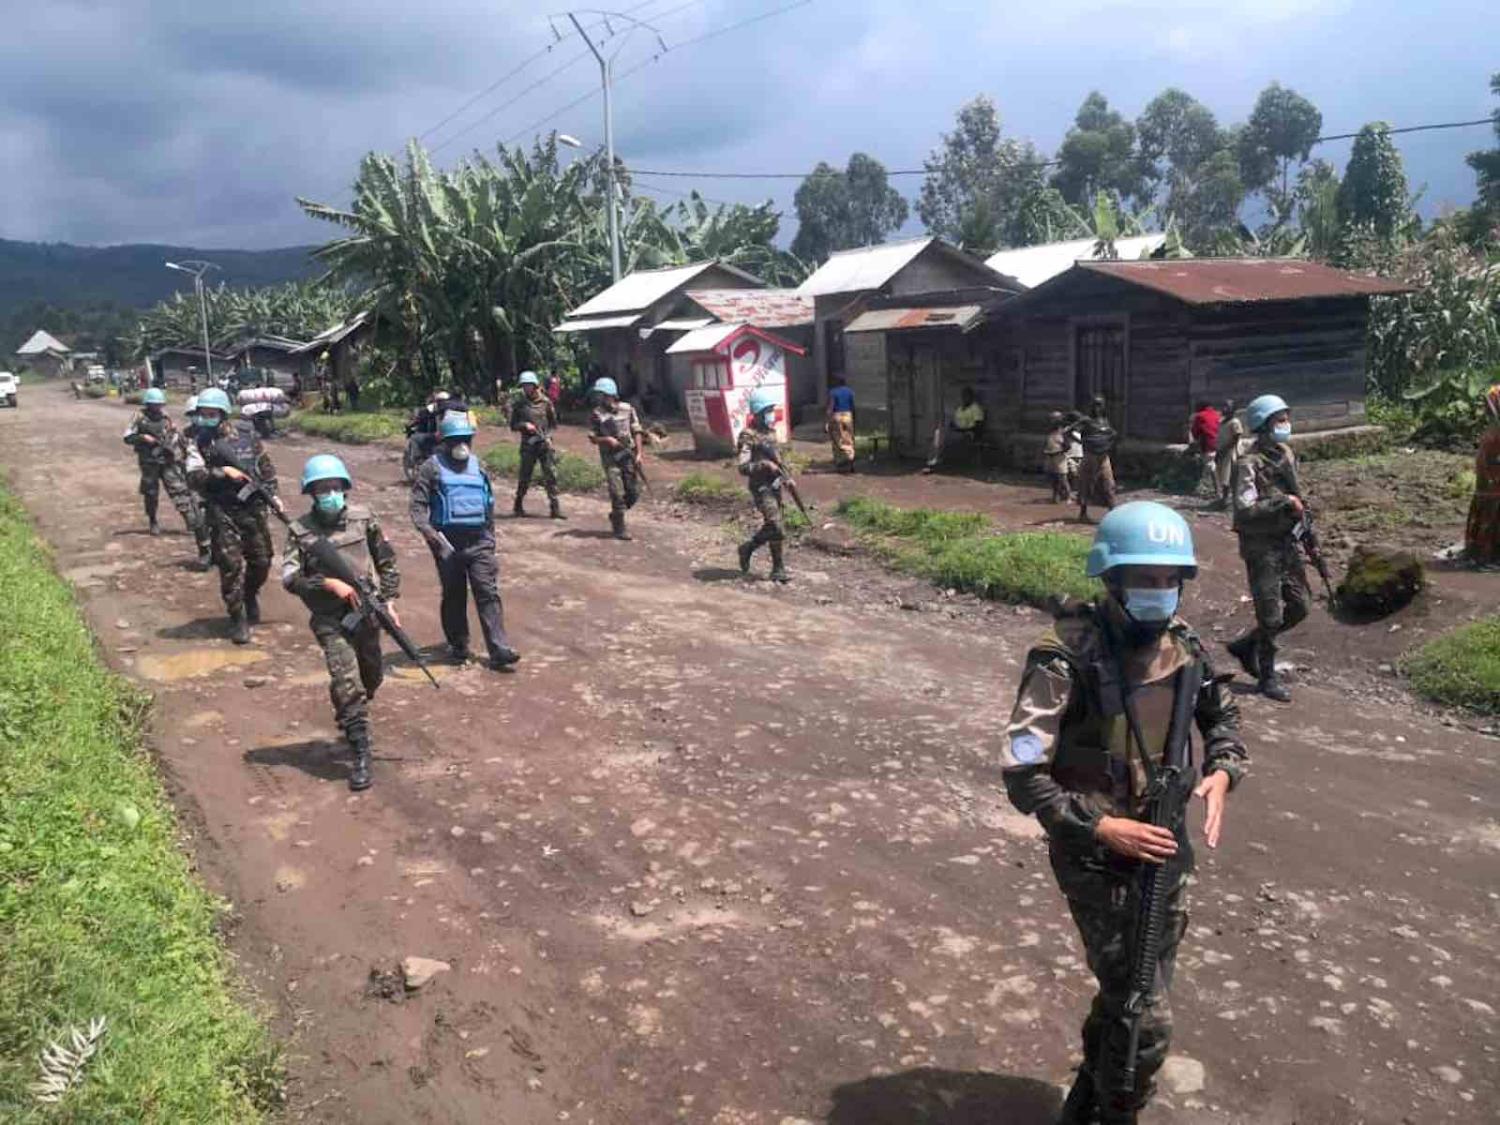 UN Peacekeepers from Morocco patrol a village in North Kivu province, Democratic Republlic of Congo, 9 May 2020 (MONUSCO Photos/Flickr)